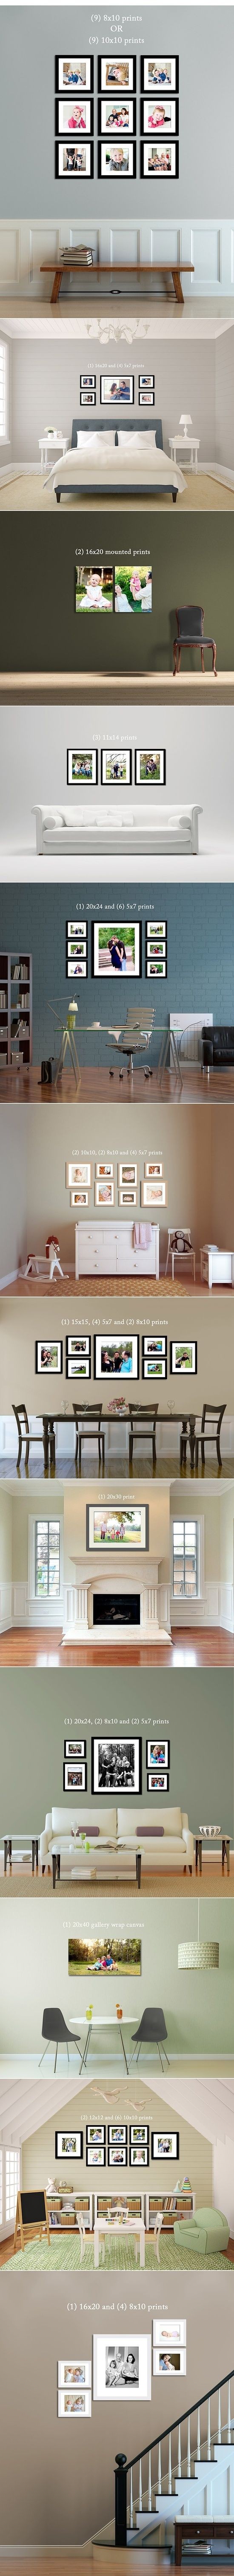 Great picture arrangement ideas. Fun wall color in...